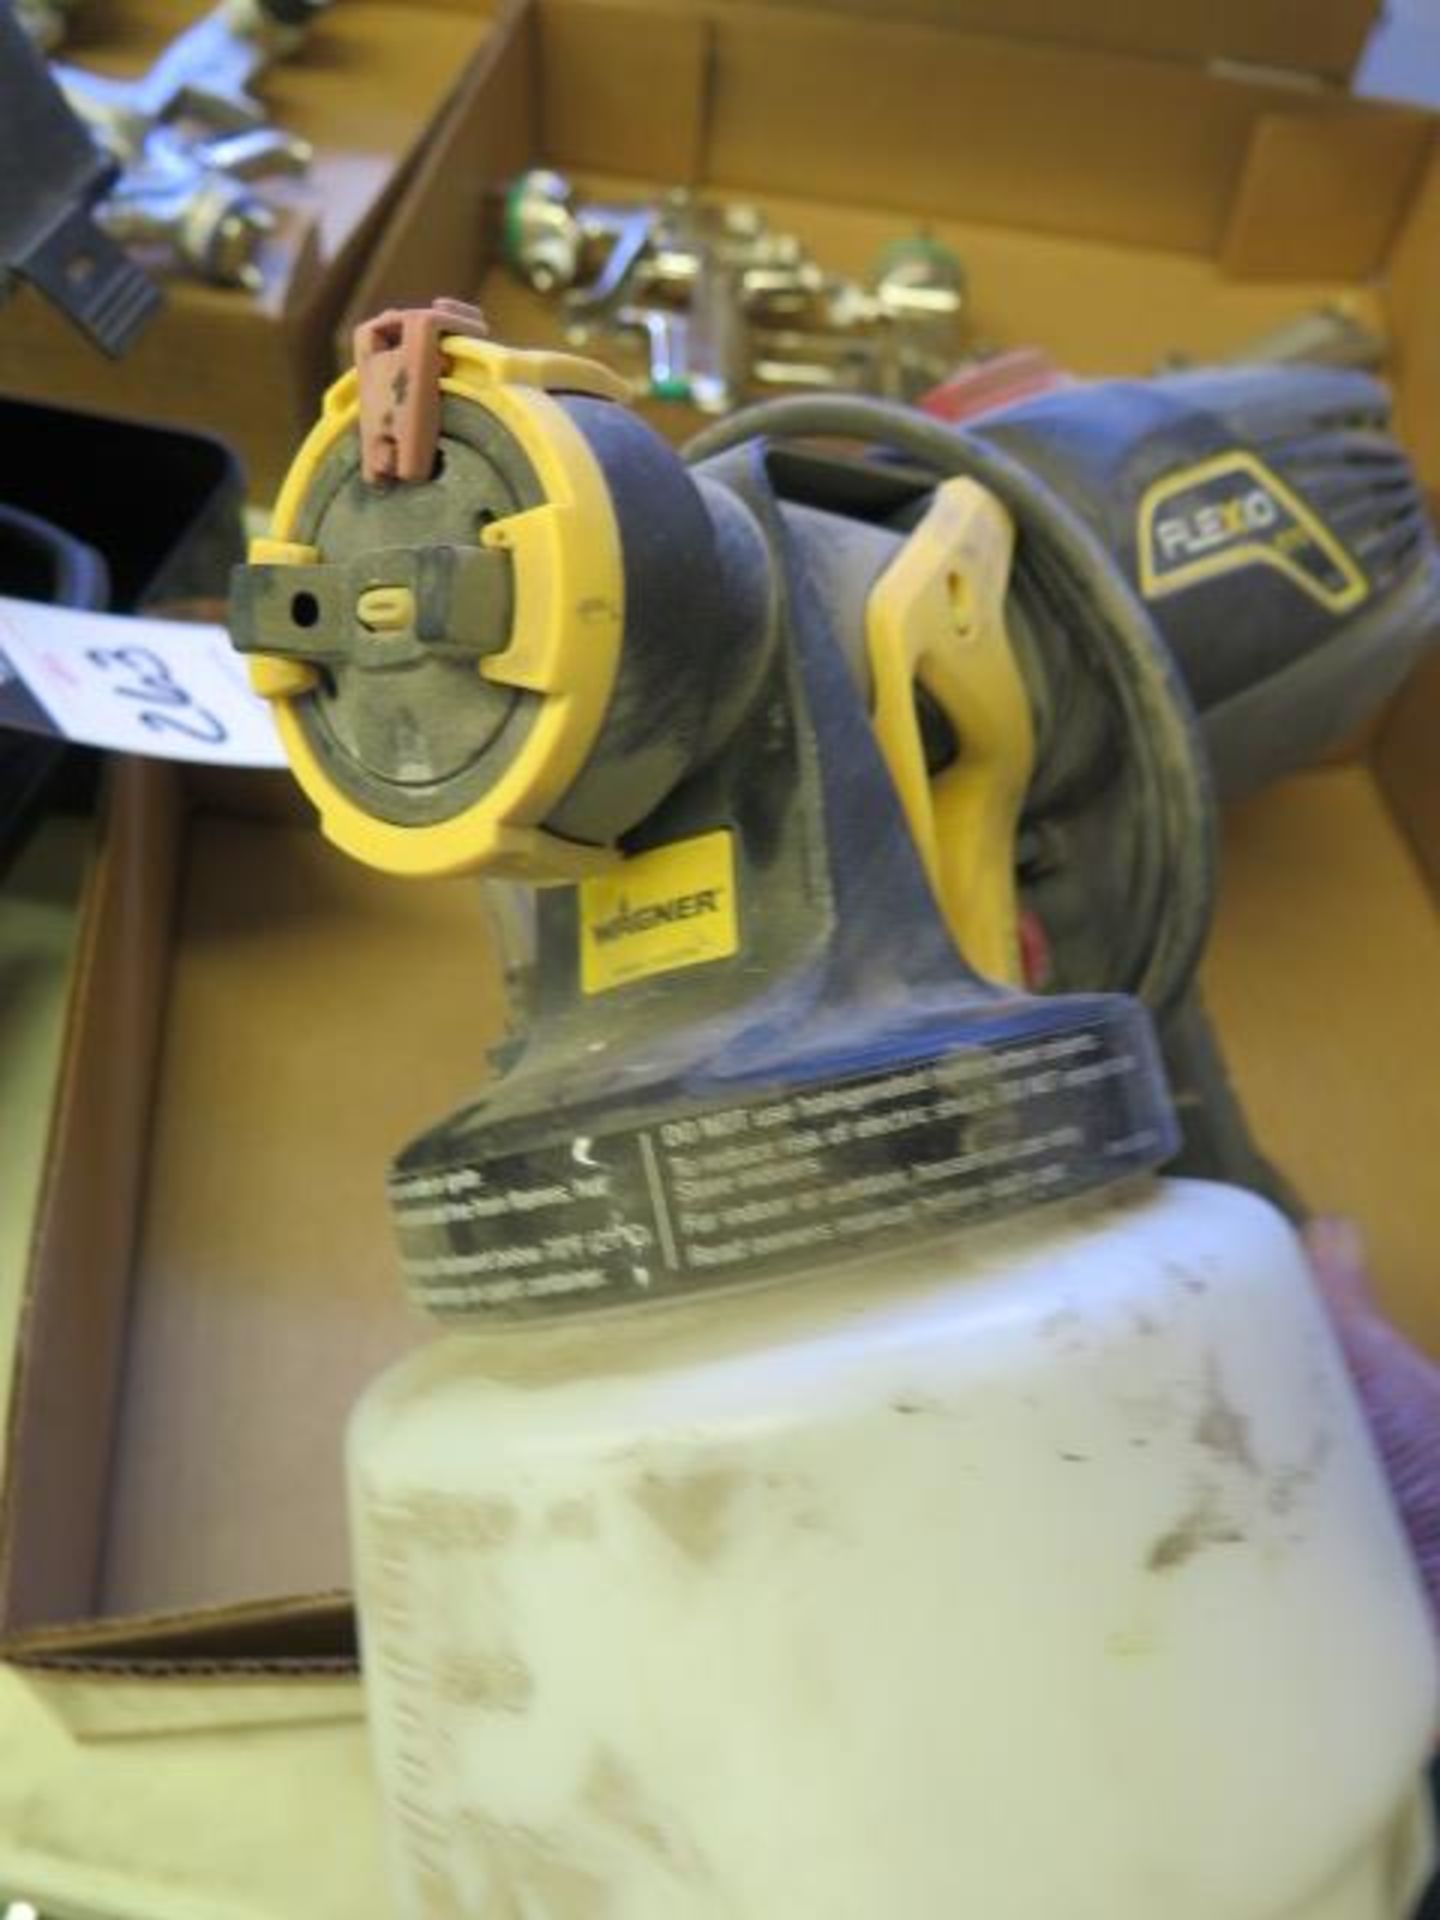 Wagner Flexio 570 Airless Paint Sprayer (SOLD AS-IS - NO WARRANTY) - Image 5 of 6